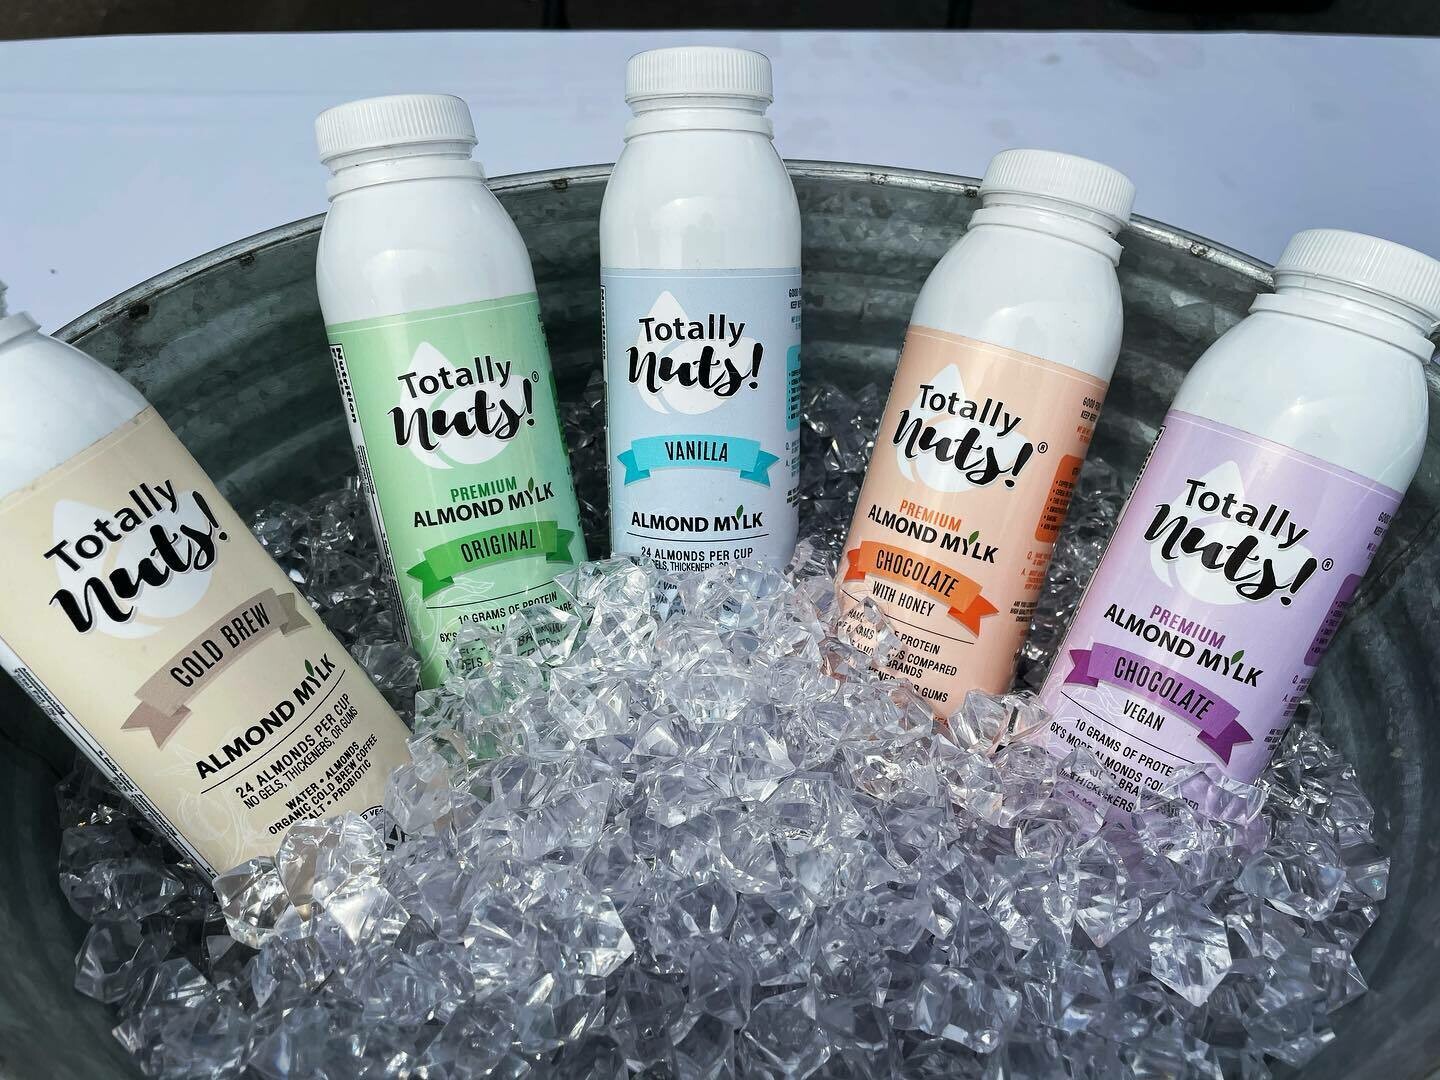 TOTALLY NUTS - LOCALLY MADE ALMOND MYLK